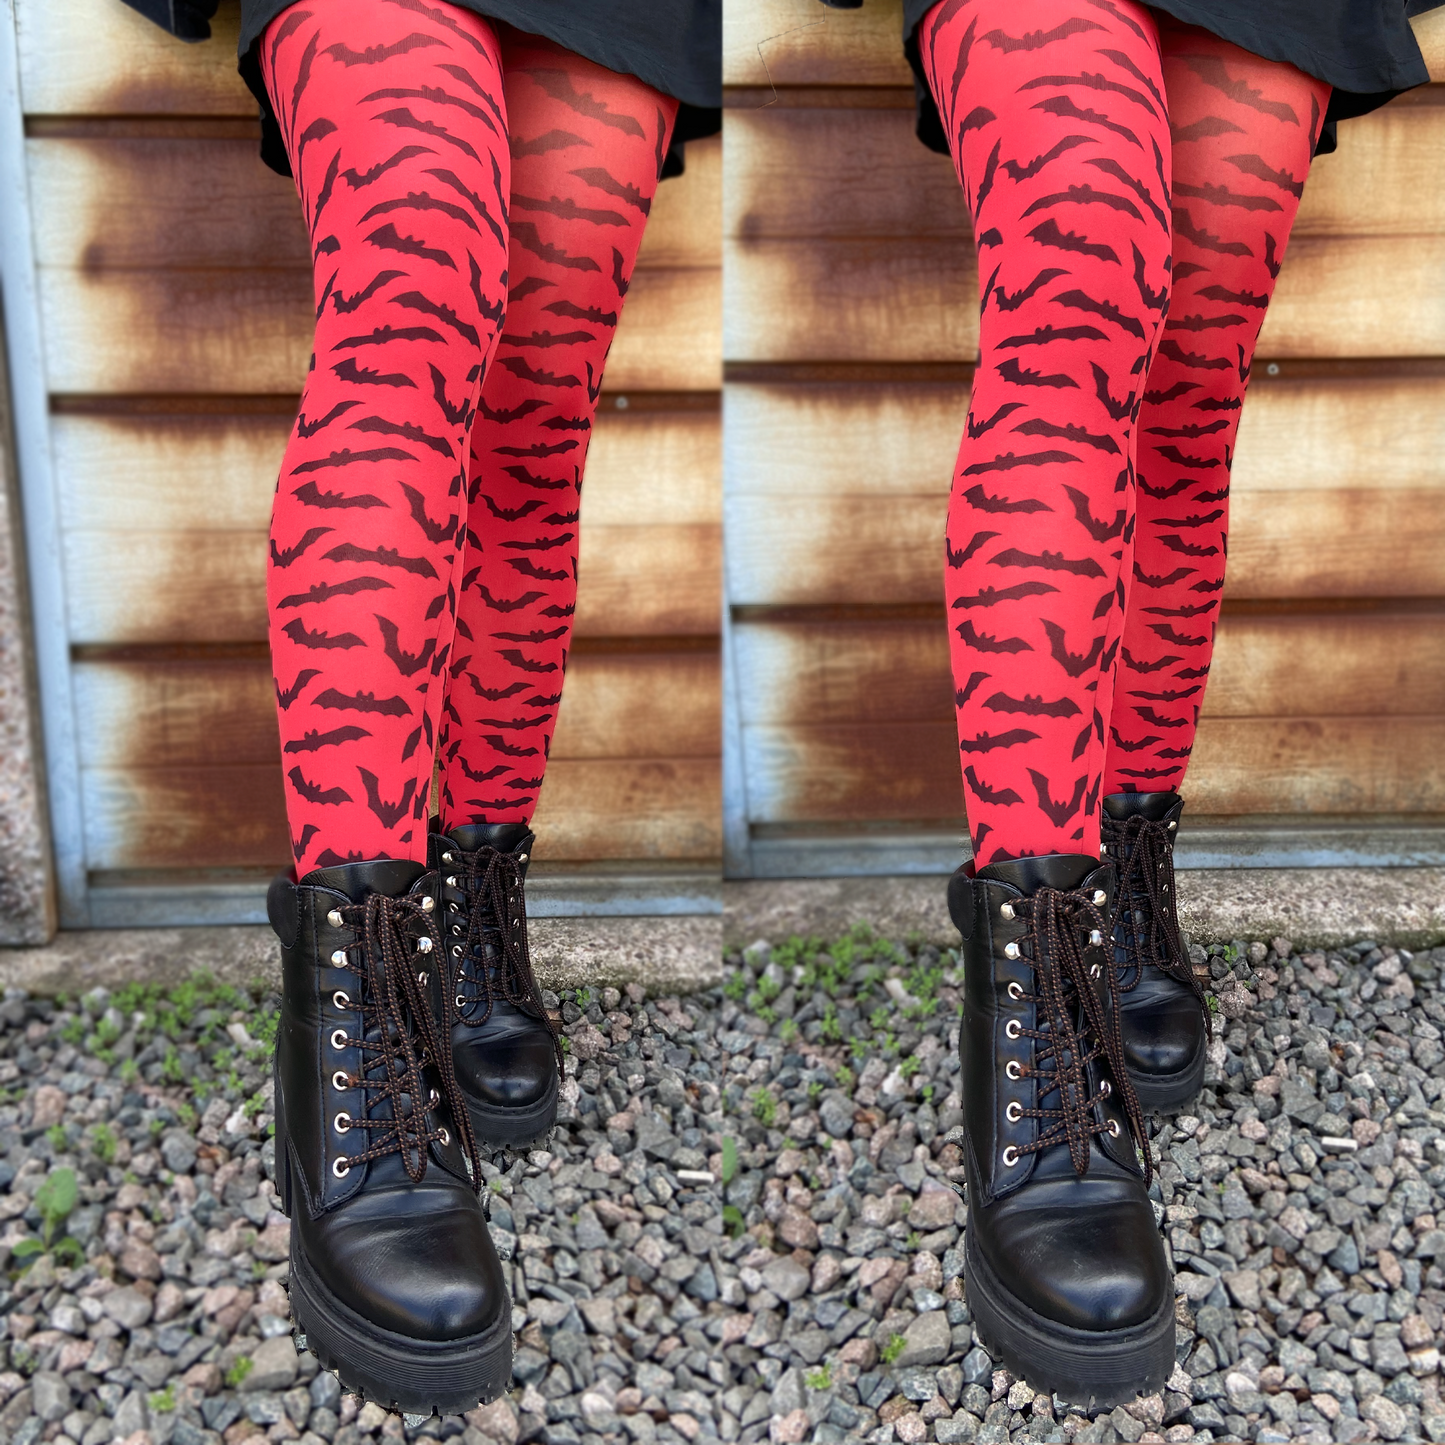 Printed Styles – Better Tights